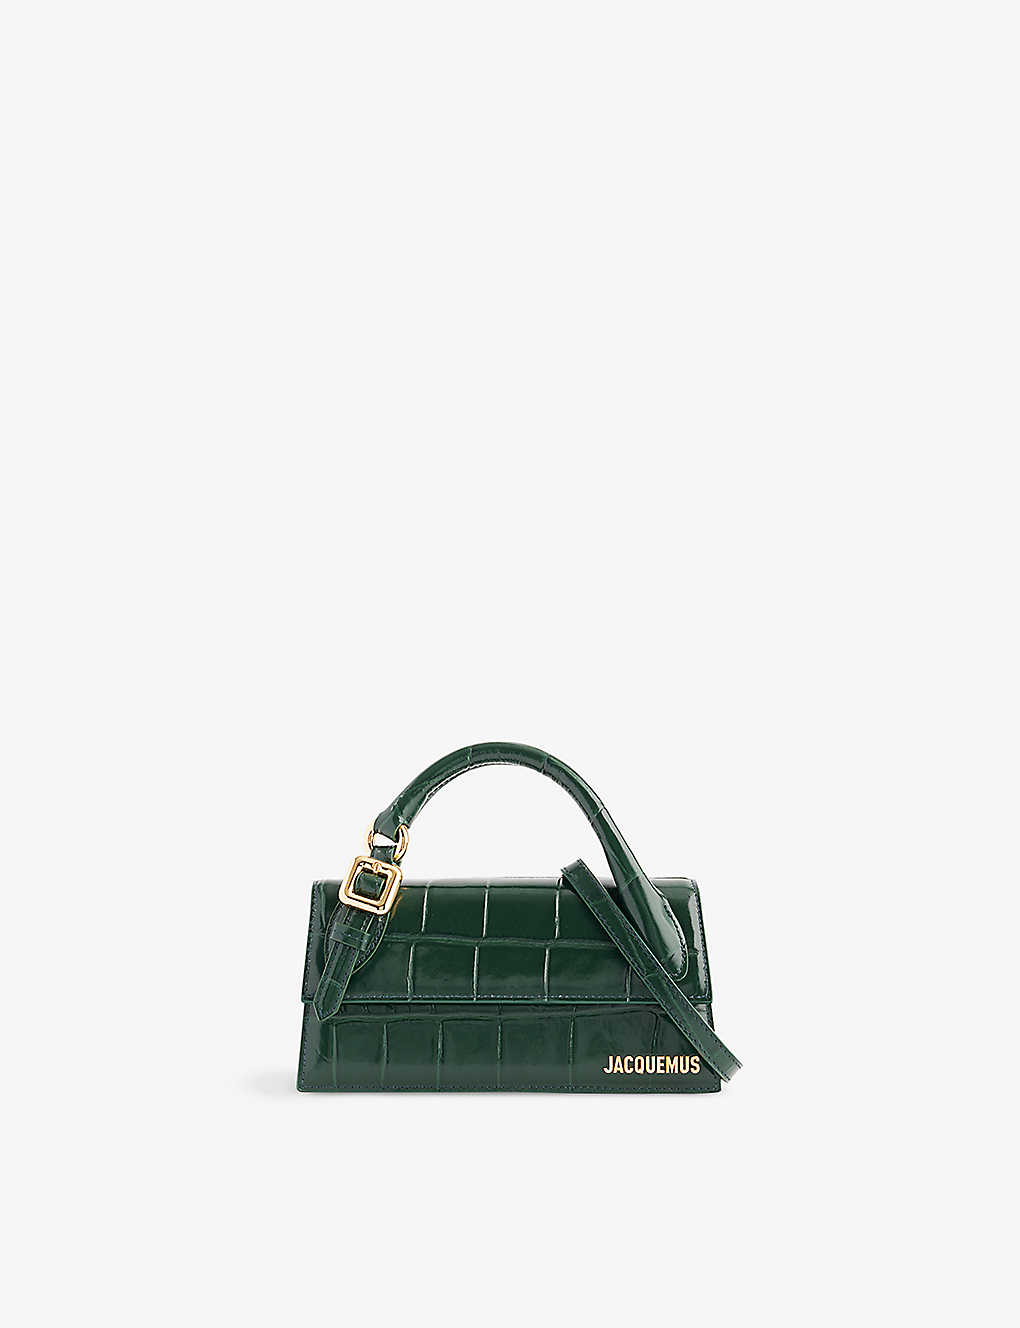 Jacquemus Le Chiquito Long Croc-effect Leather Top-handle Bag In Dark Green